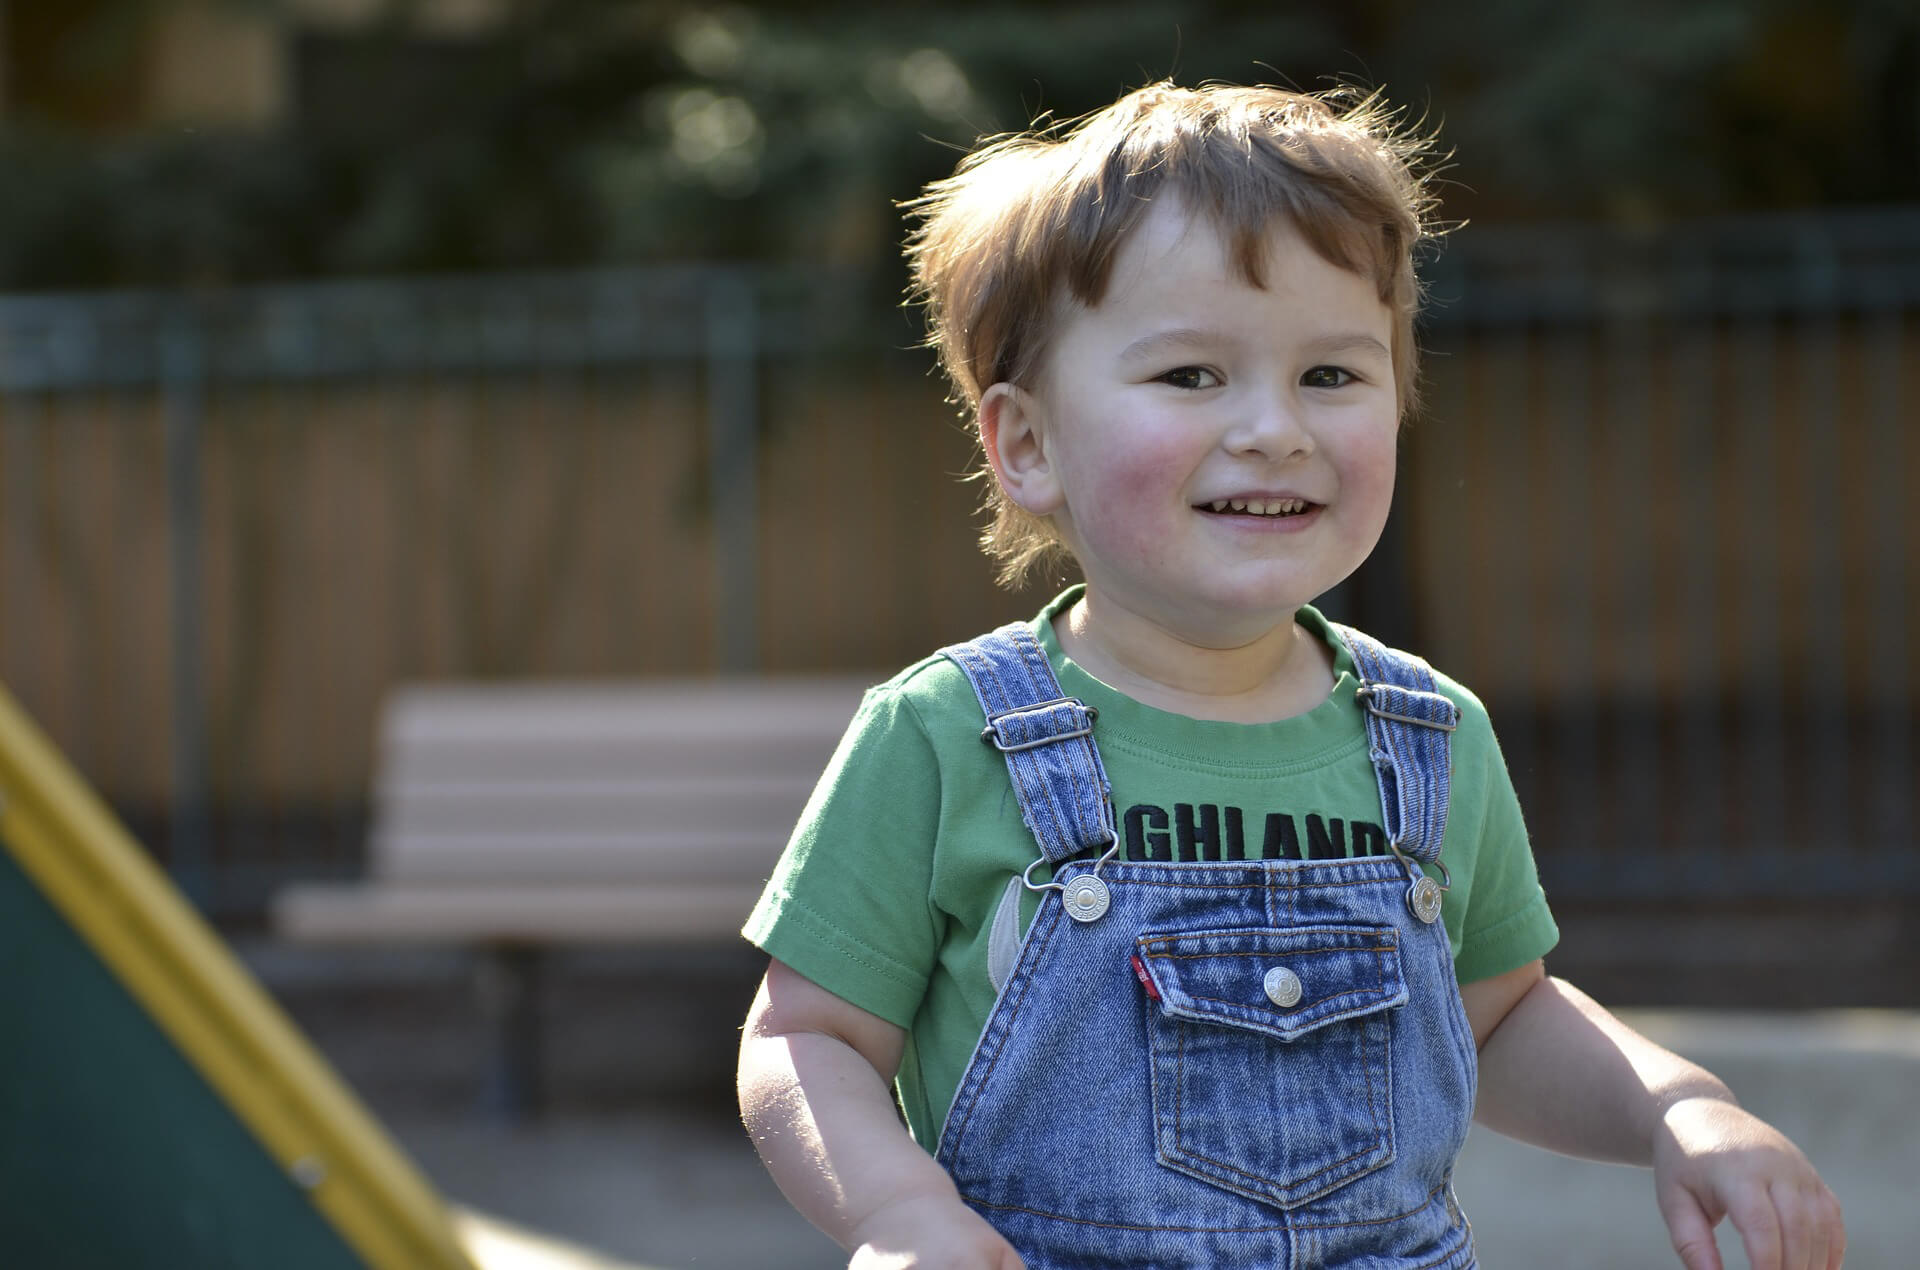 A young boy on the playground smiling